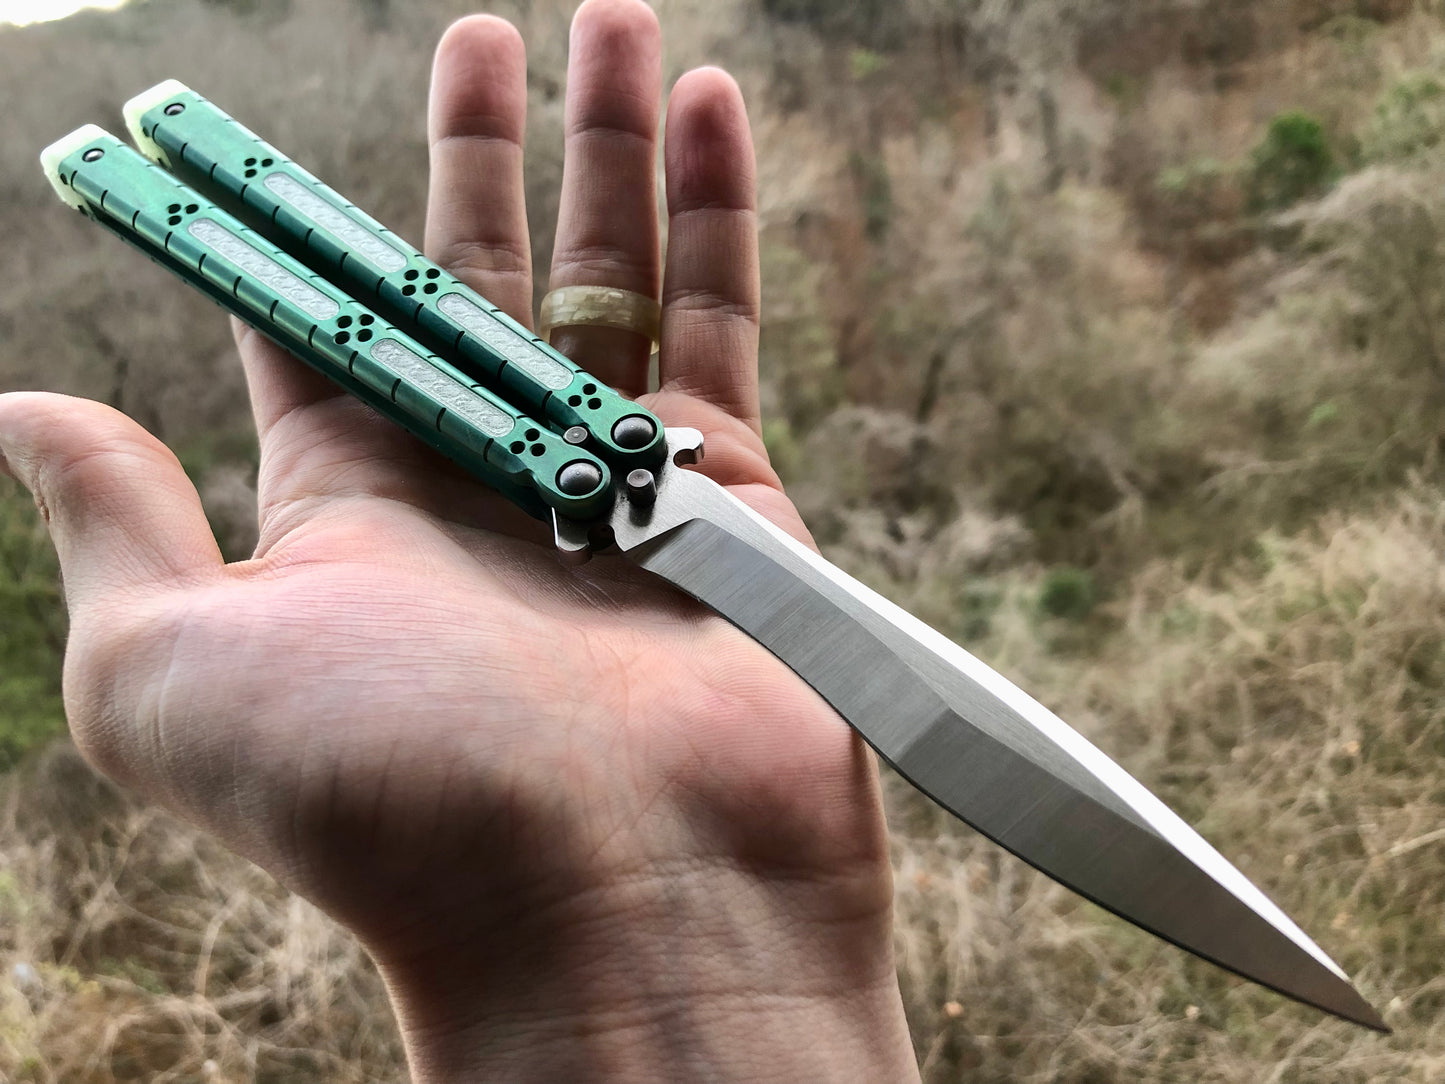 Reduce the handle bias of your HOM i-Basilisk, HOM Basilisk-R  (for Titanium and G10/CF variants), and HOM Prodigy balisongs with Zippy extension spacers and handle inlays.